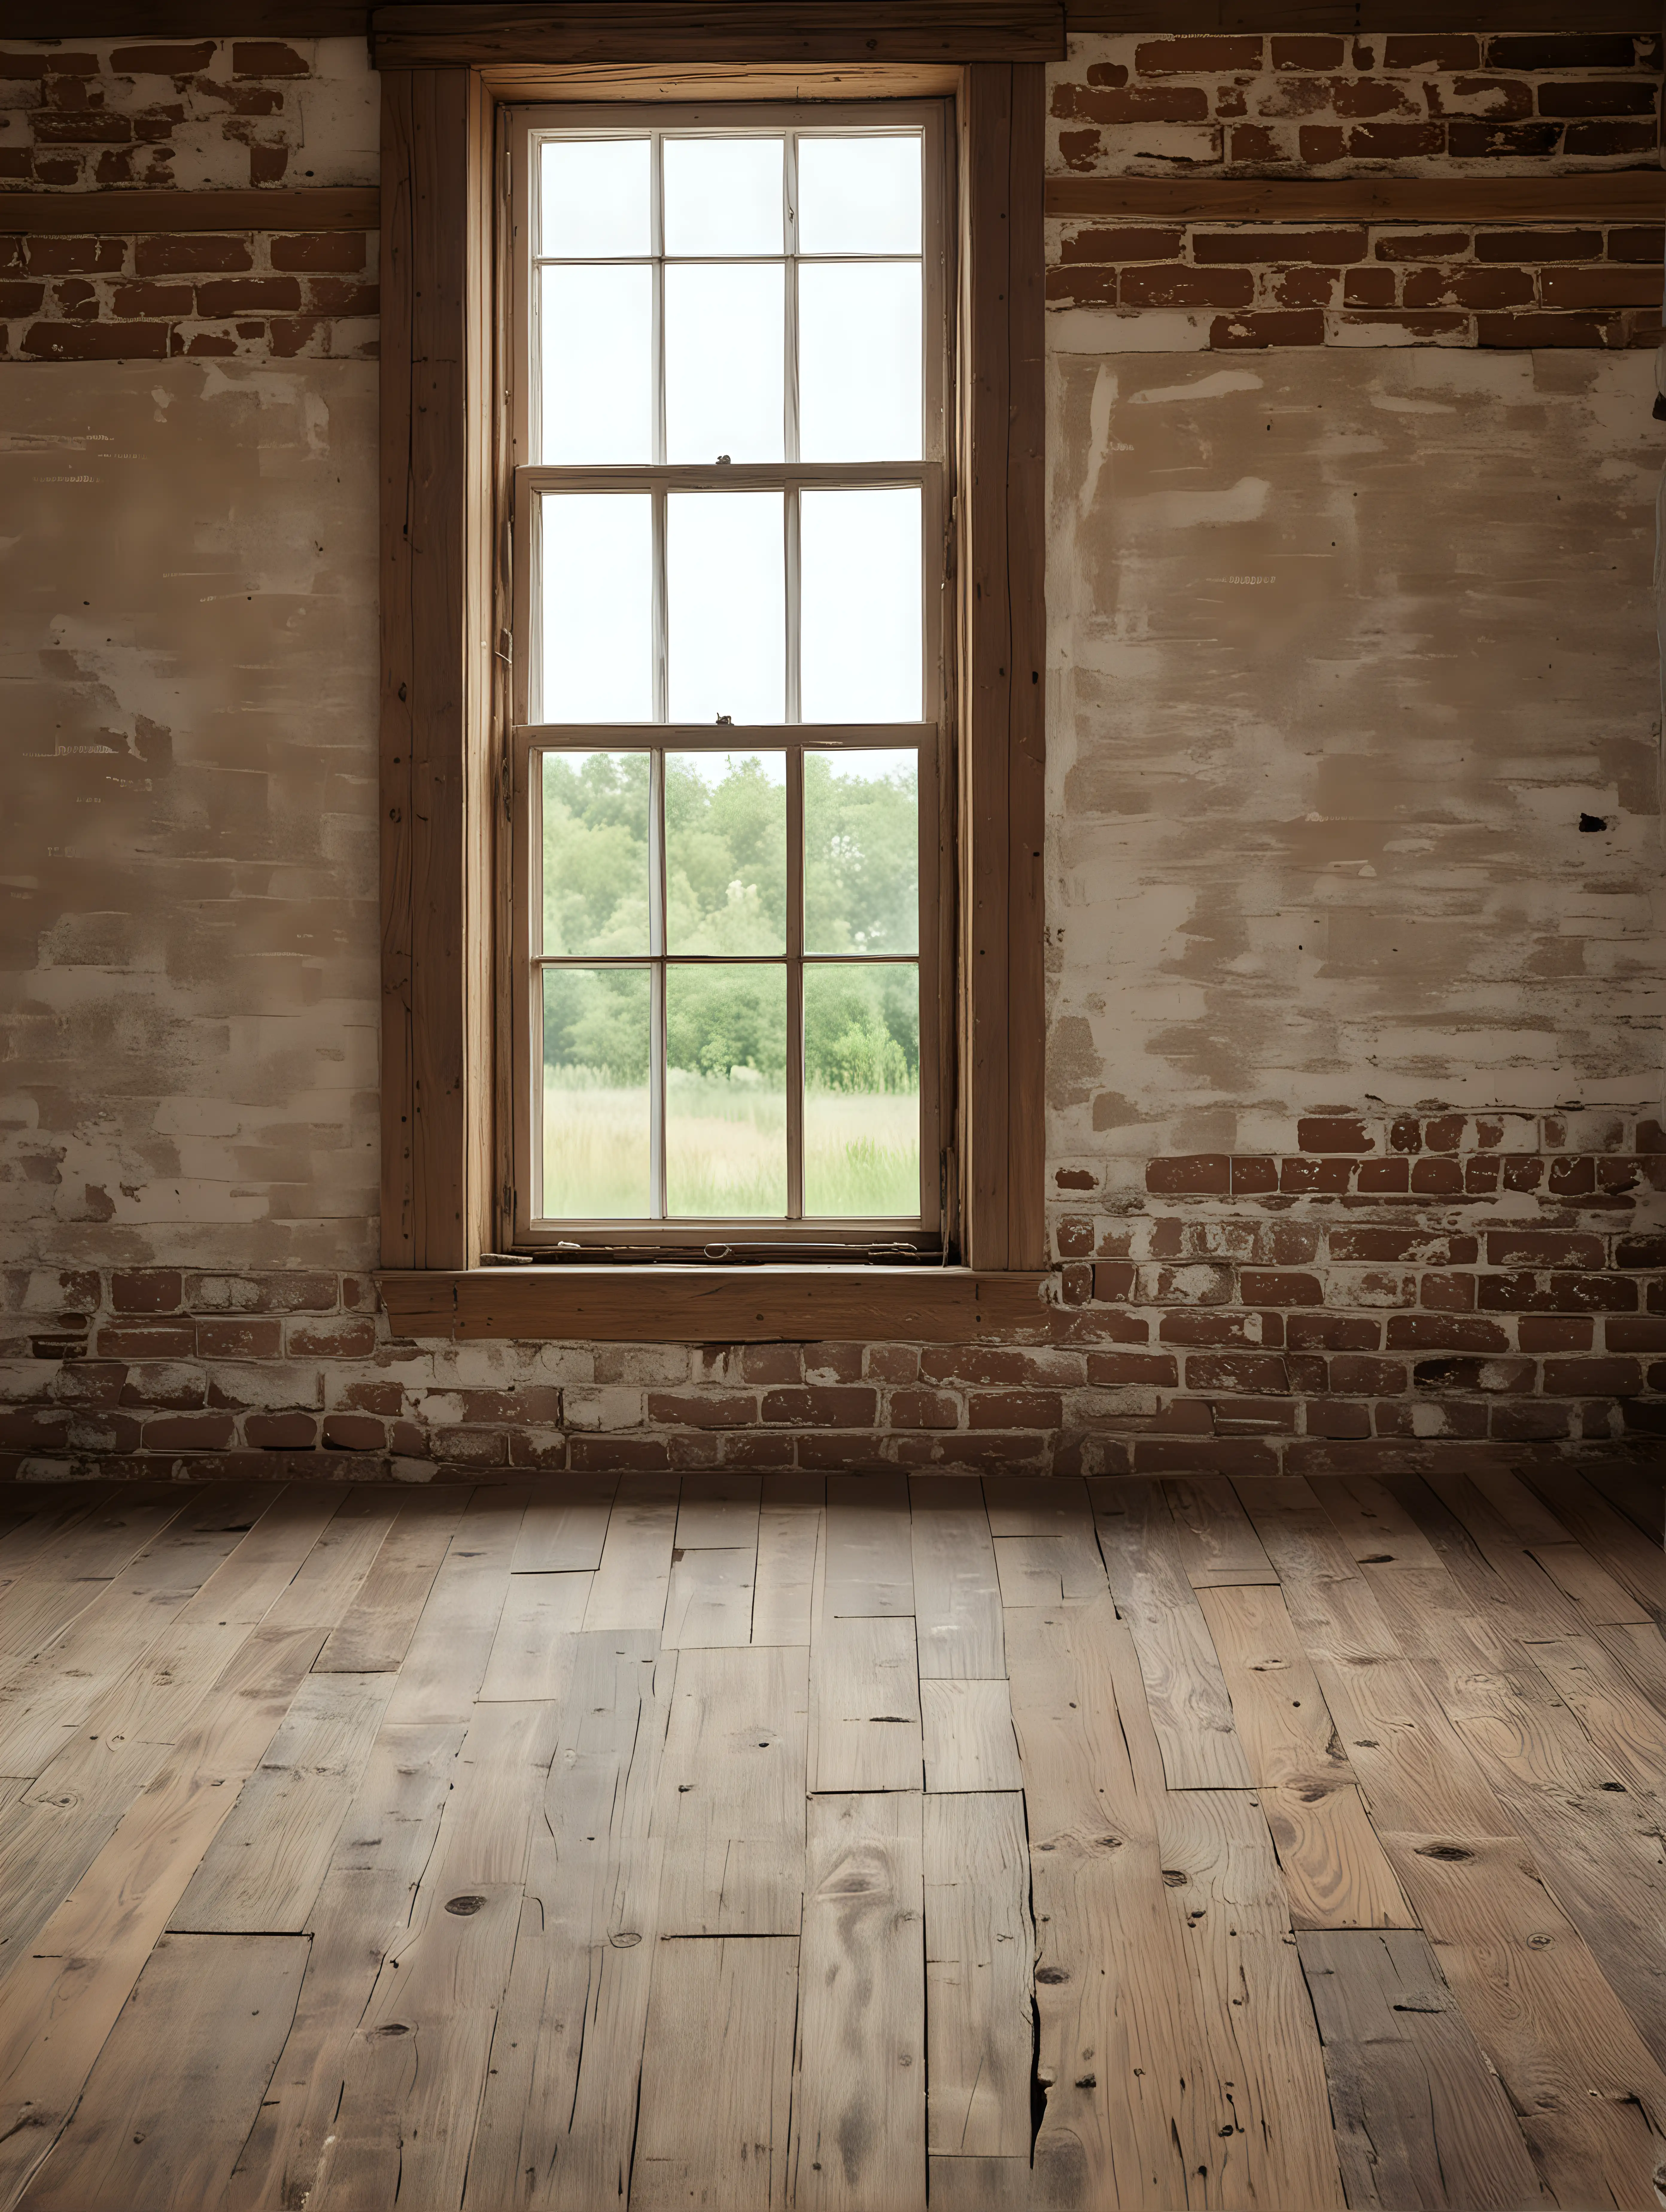 Rustic Wooden Floor in Old Farmhouse with Window